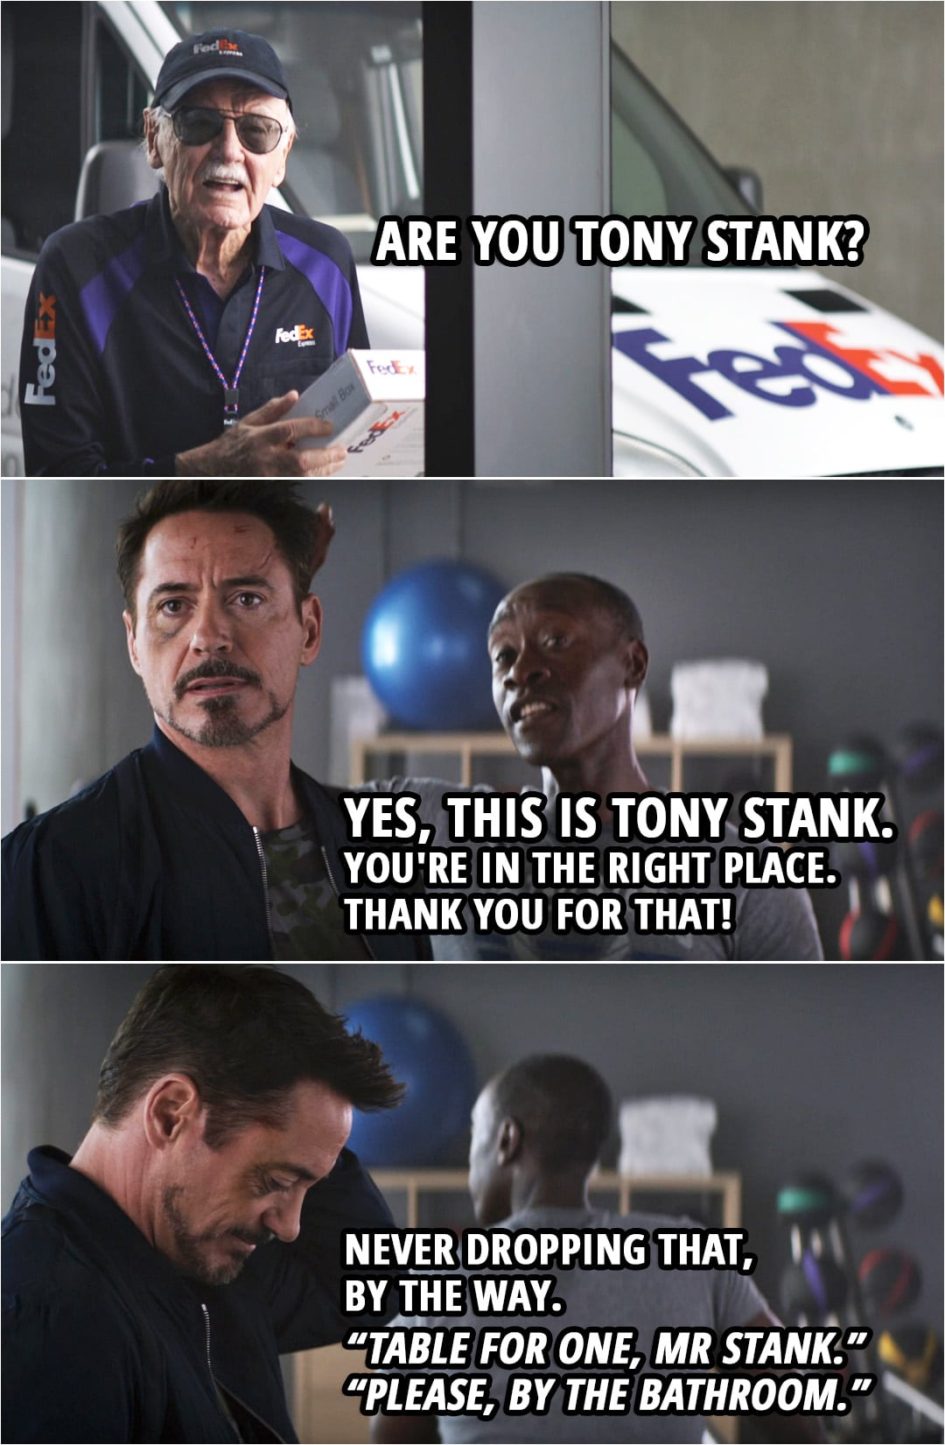 Quote from Captain America: Civil War (2016) | The Watcher Informant (as a FedEx delivery guy): Are you Tony Stank? Rhodey: Yes, this is Tony Stank. You're in the right place. Thank you for that! Never dropping that, by the way. "Table for one, Mr Stank." "Please, by the bathroom."